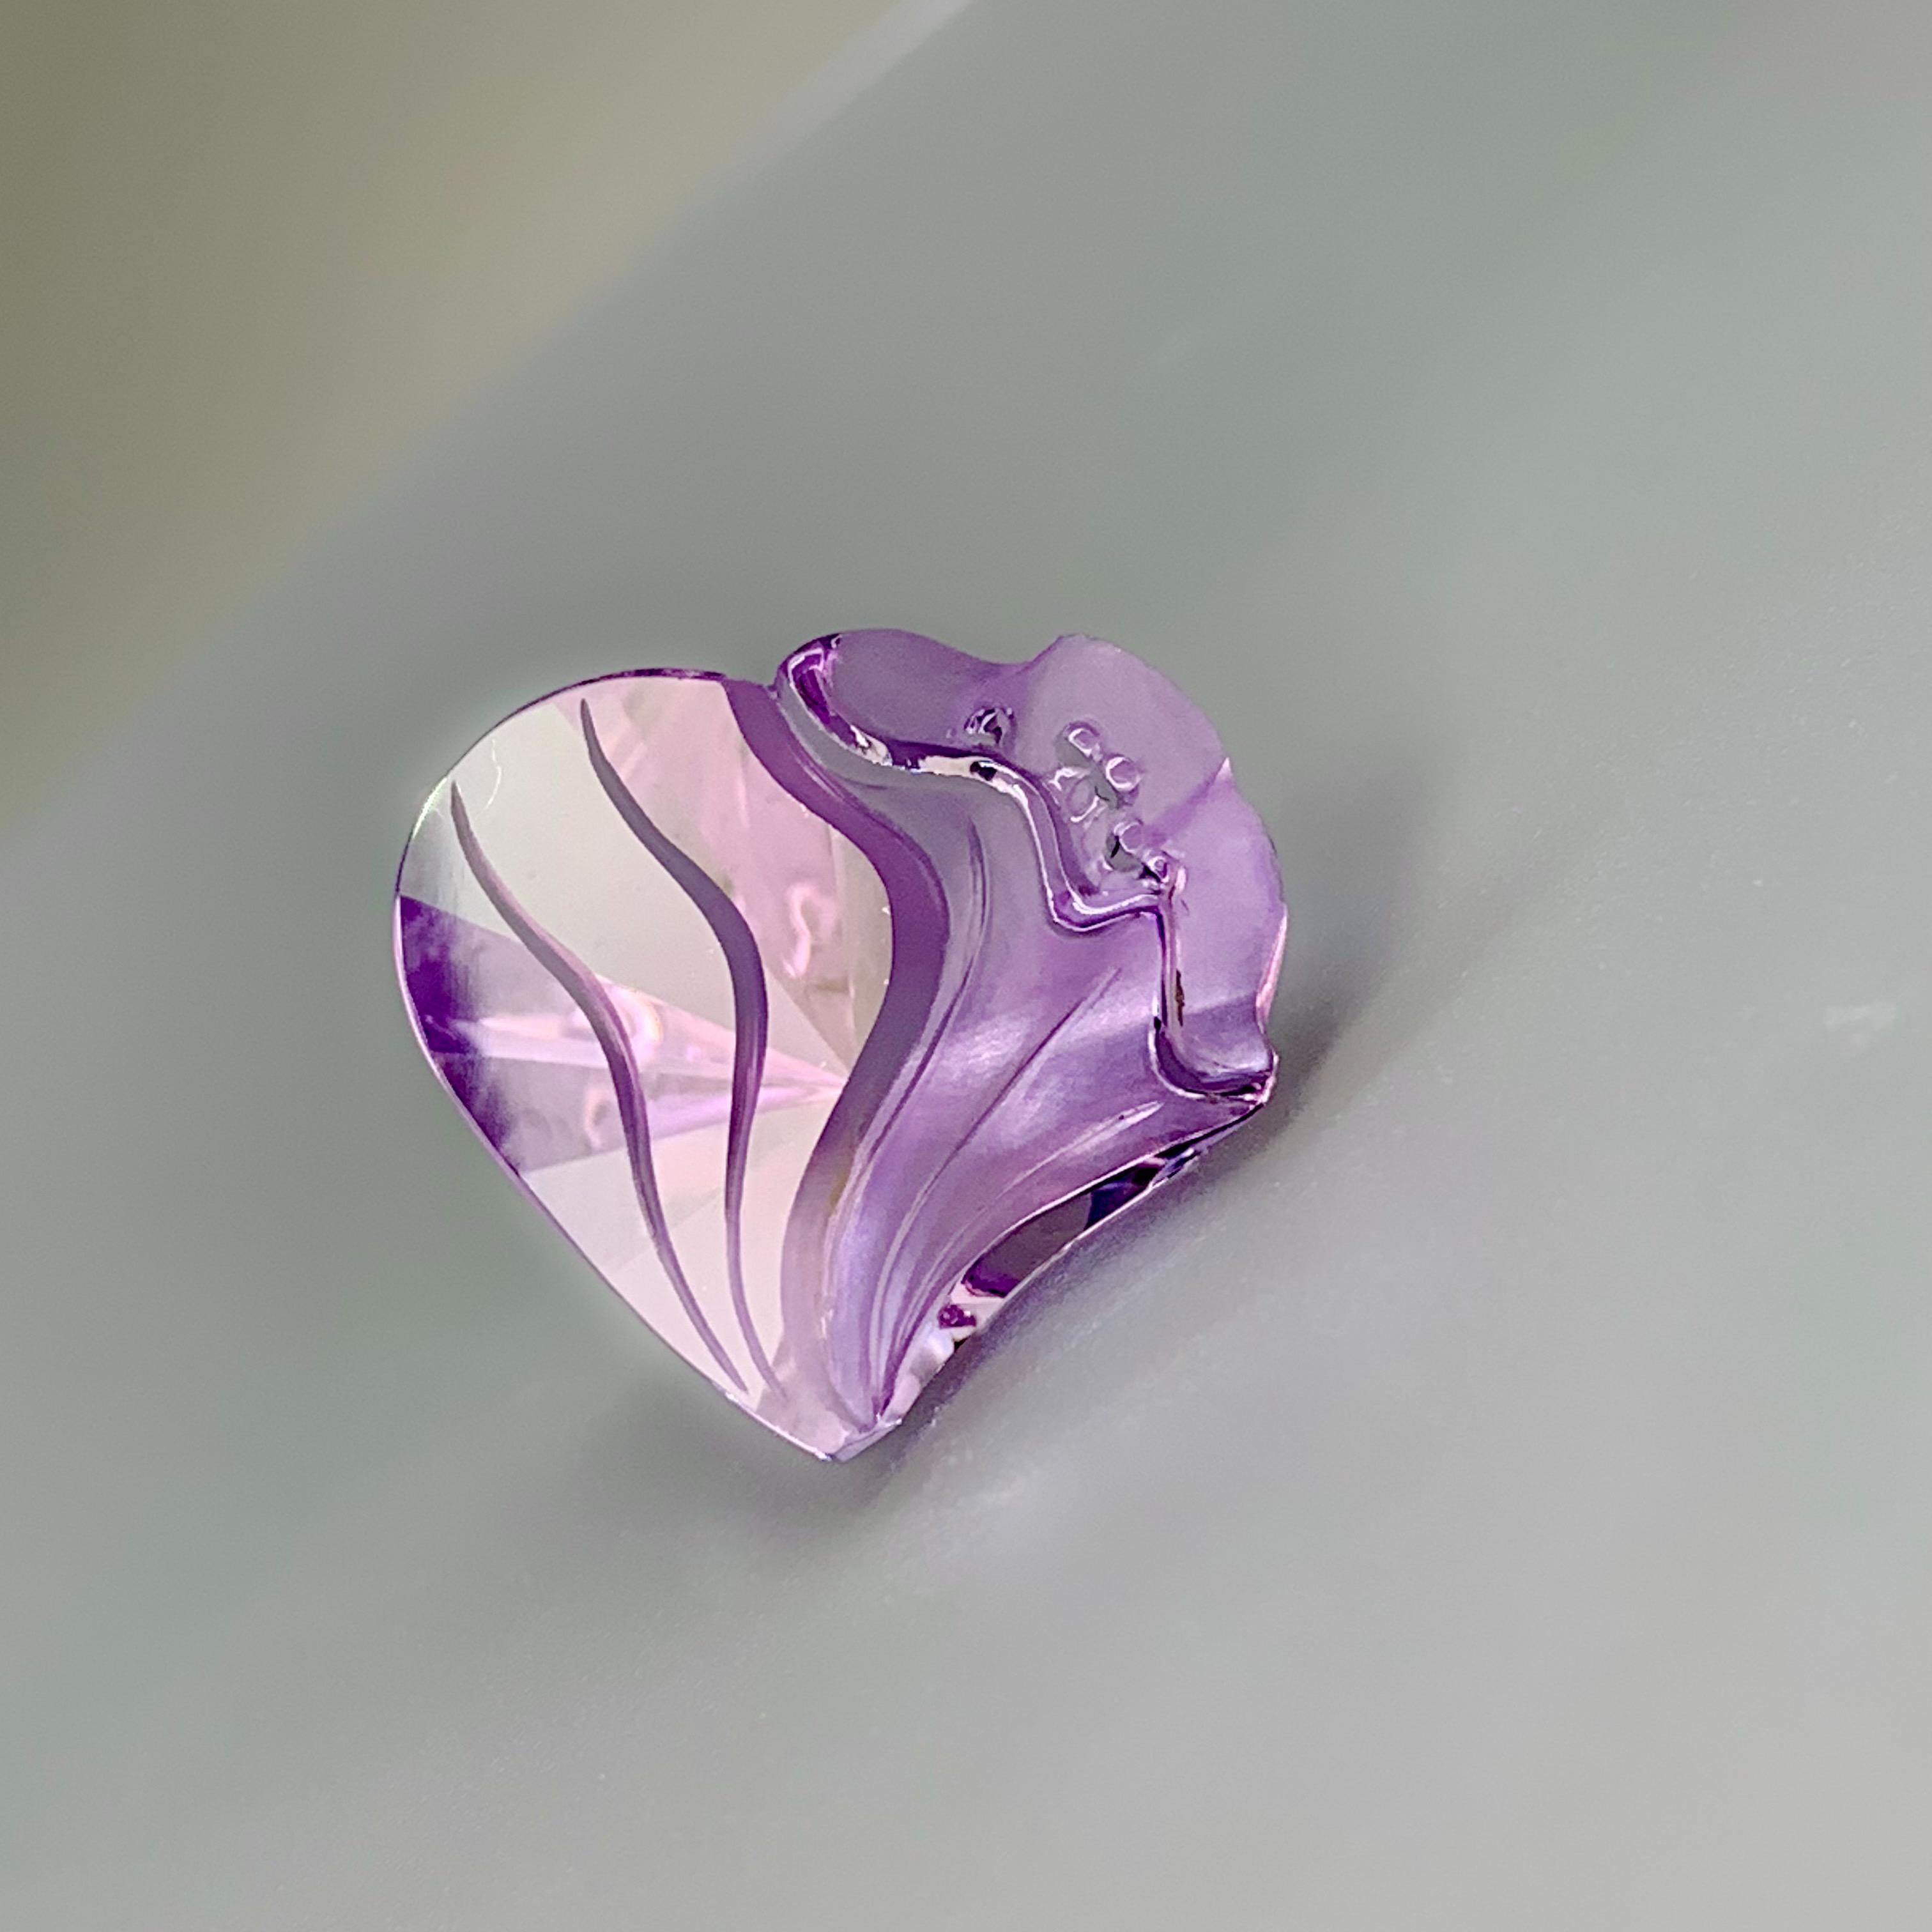 This gorgeously hand carved lavender amethyst from Idar Oberstein Germany (a world famous gem cutting region known for it's artistry and quality) is a piece that is meant to be seen from every angle. It has an overall heart shape with amazingly